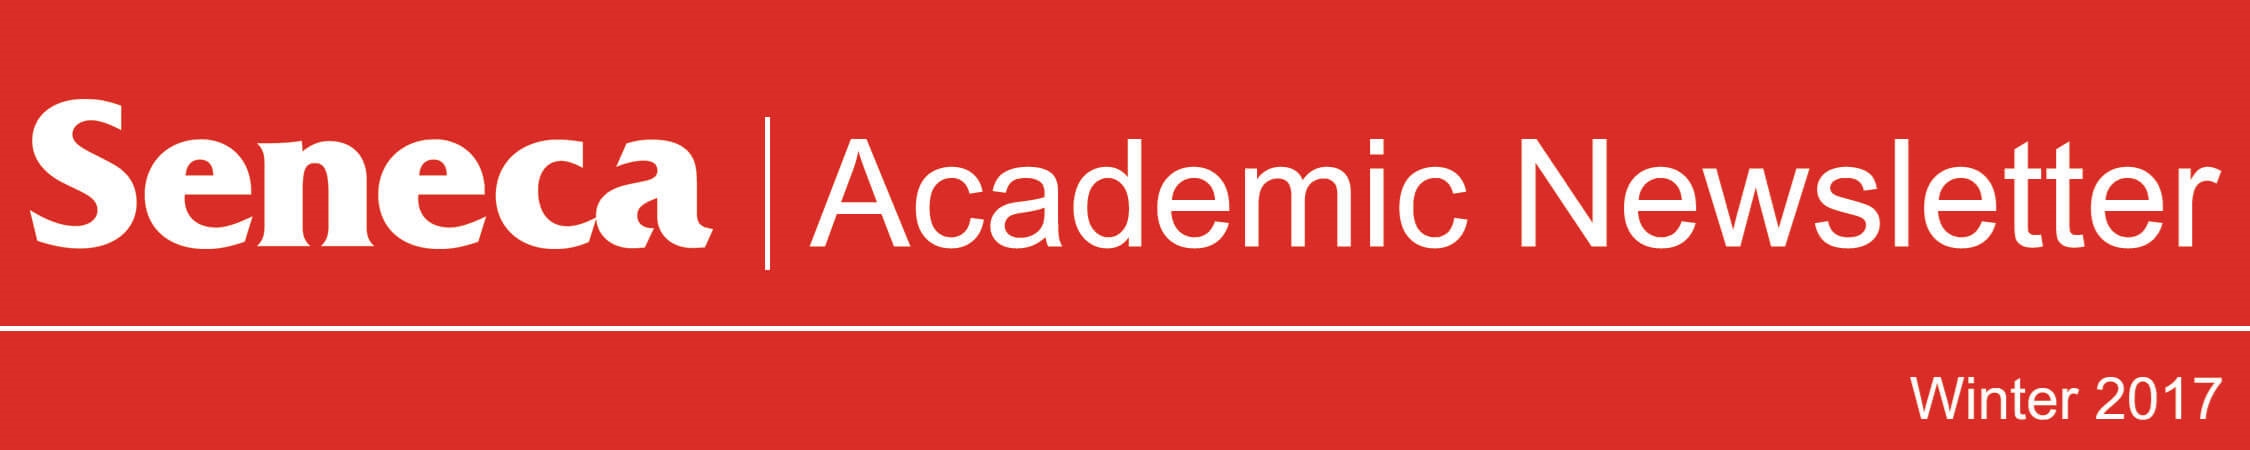 The header logo for the Winter 2017 issue of the Academic Newsletter